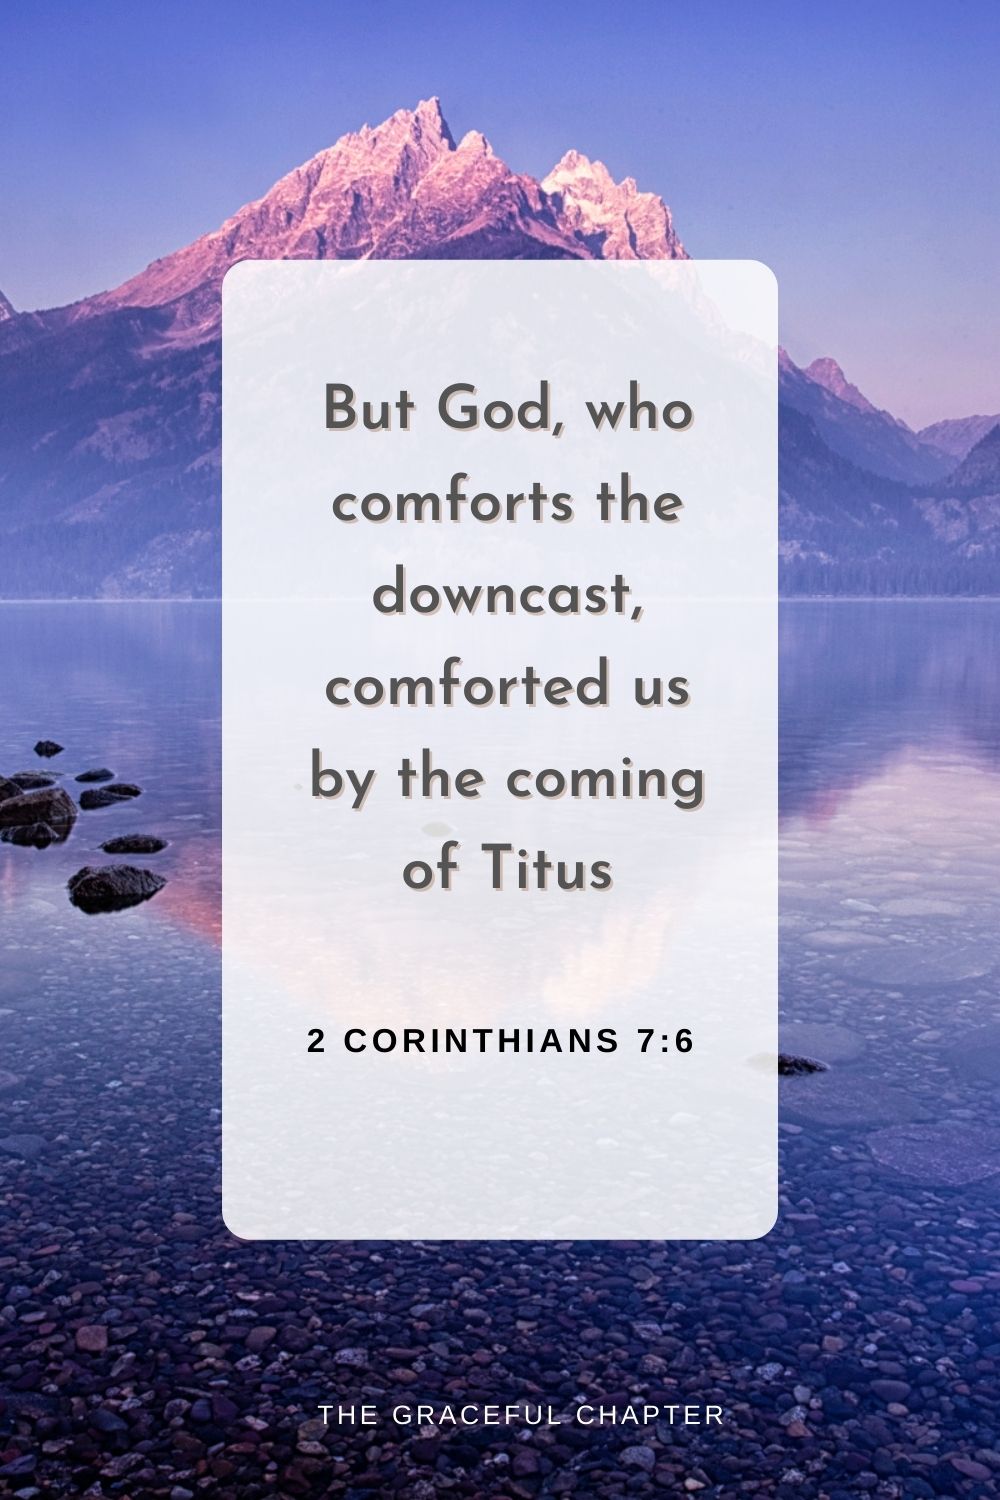 But God, who comforts the downcast, comforted us by the coming of Titus